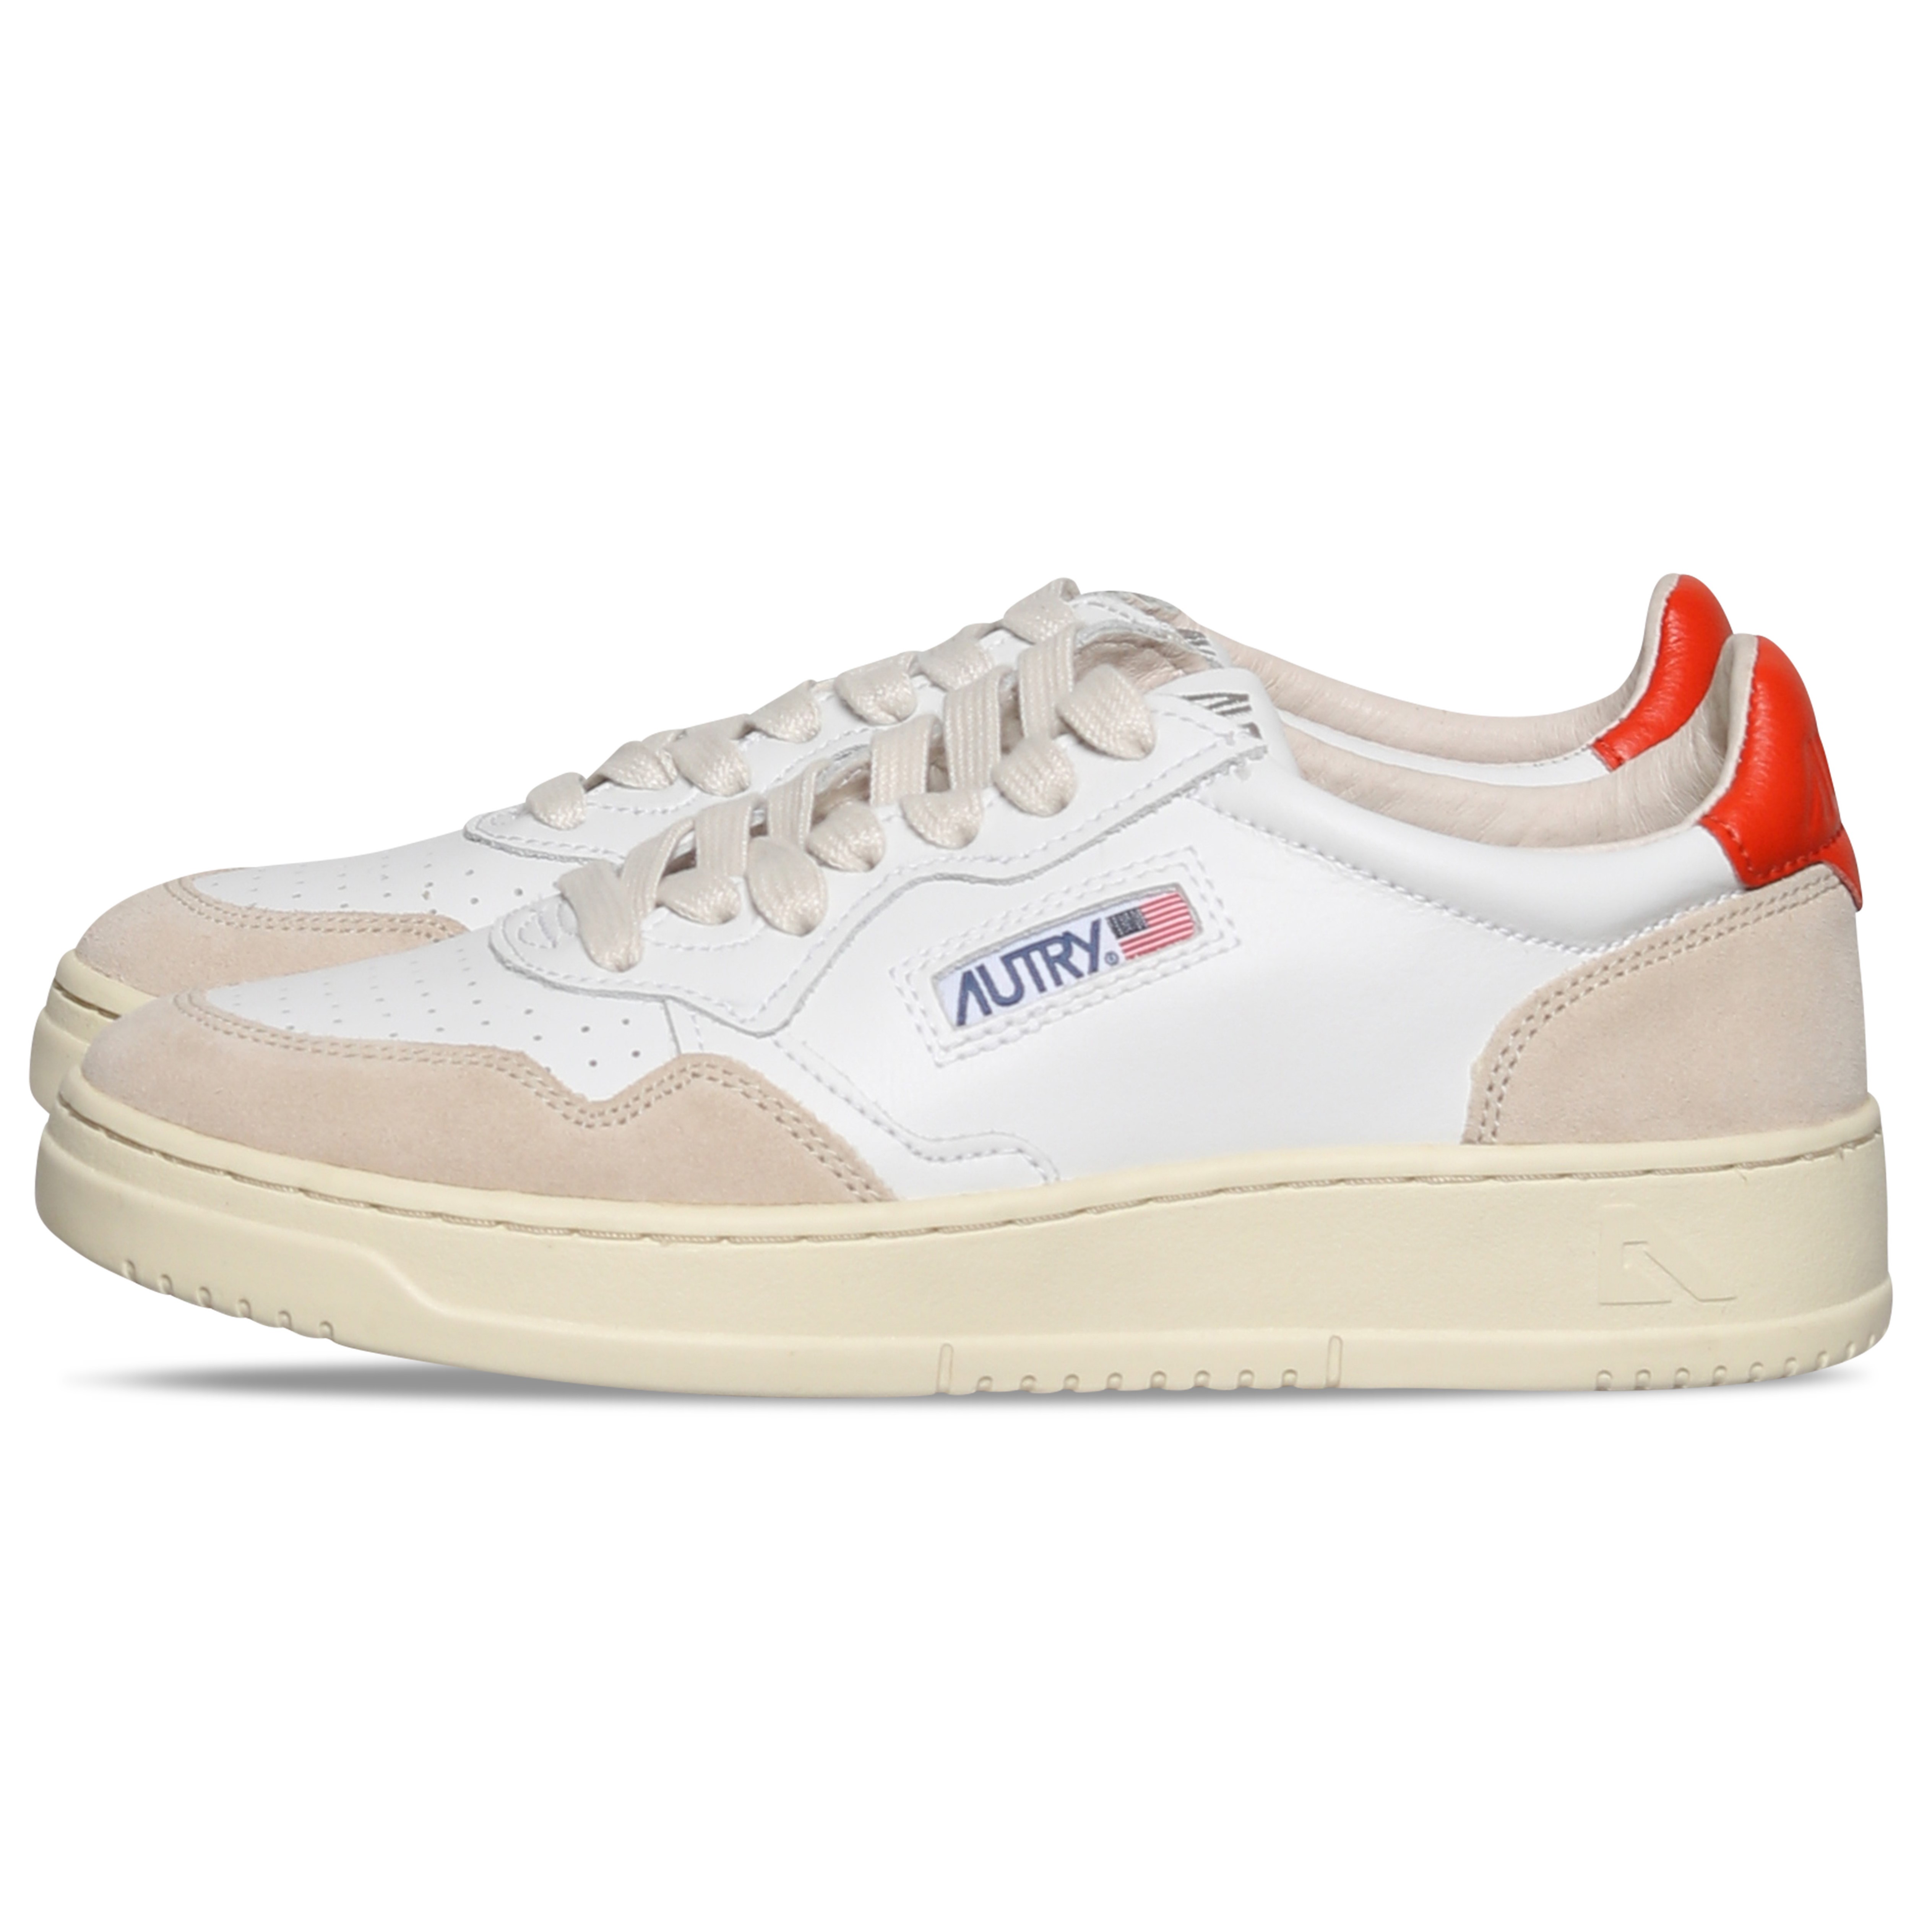 Autry Action Shoes Low Sneaker White/Suede/Orange 35